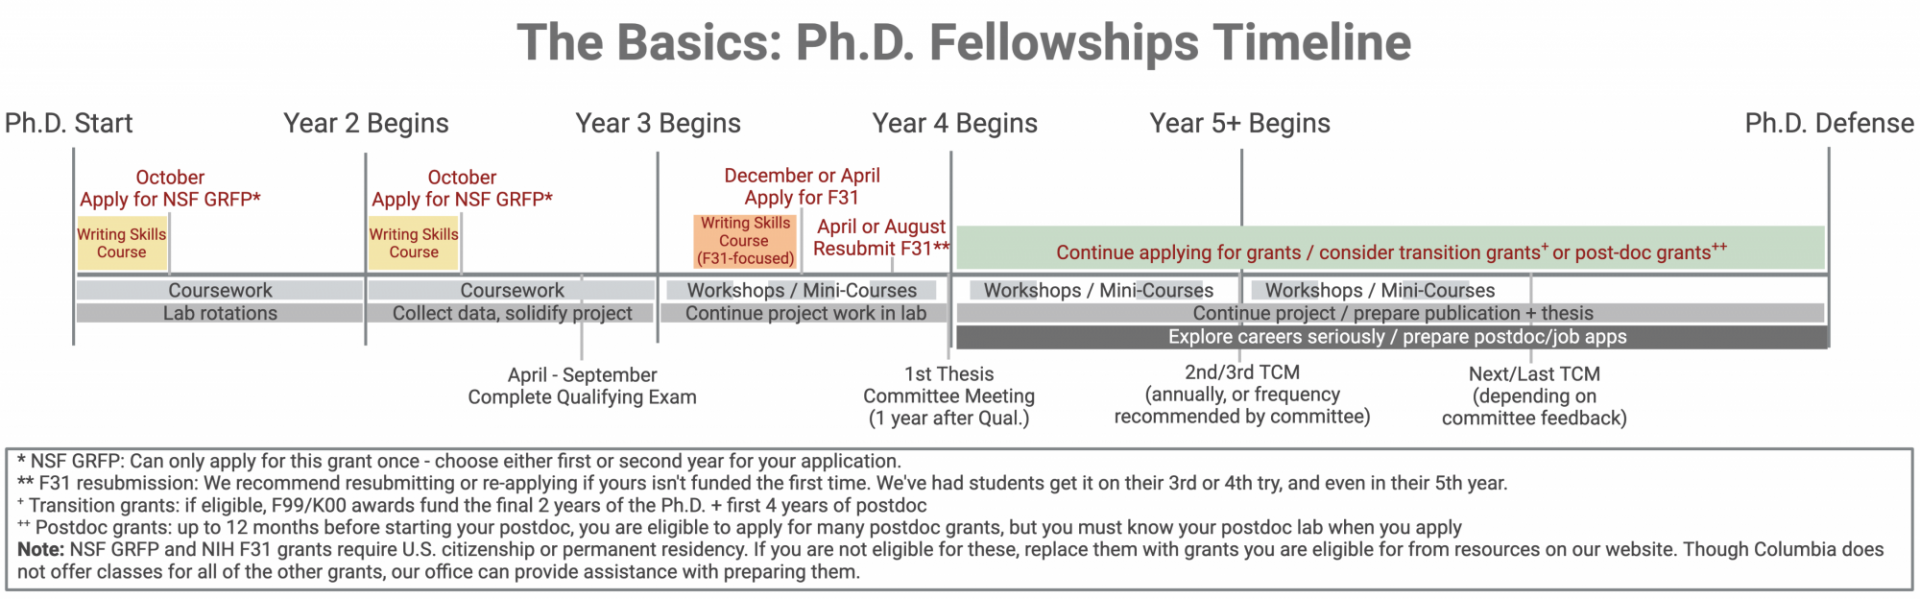 Ph.D. Basics Timeline: shows coursework, lab rotations and lab project work, and milestones such as NSF and F31 applications, and thesis committee meetings, from the beginning of the Ph.D. through the Defense.